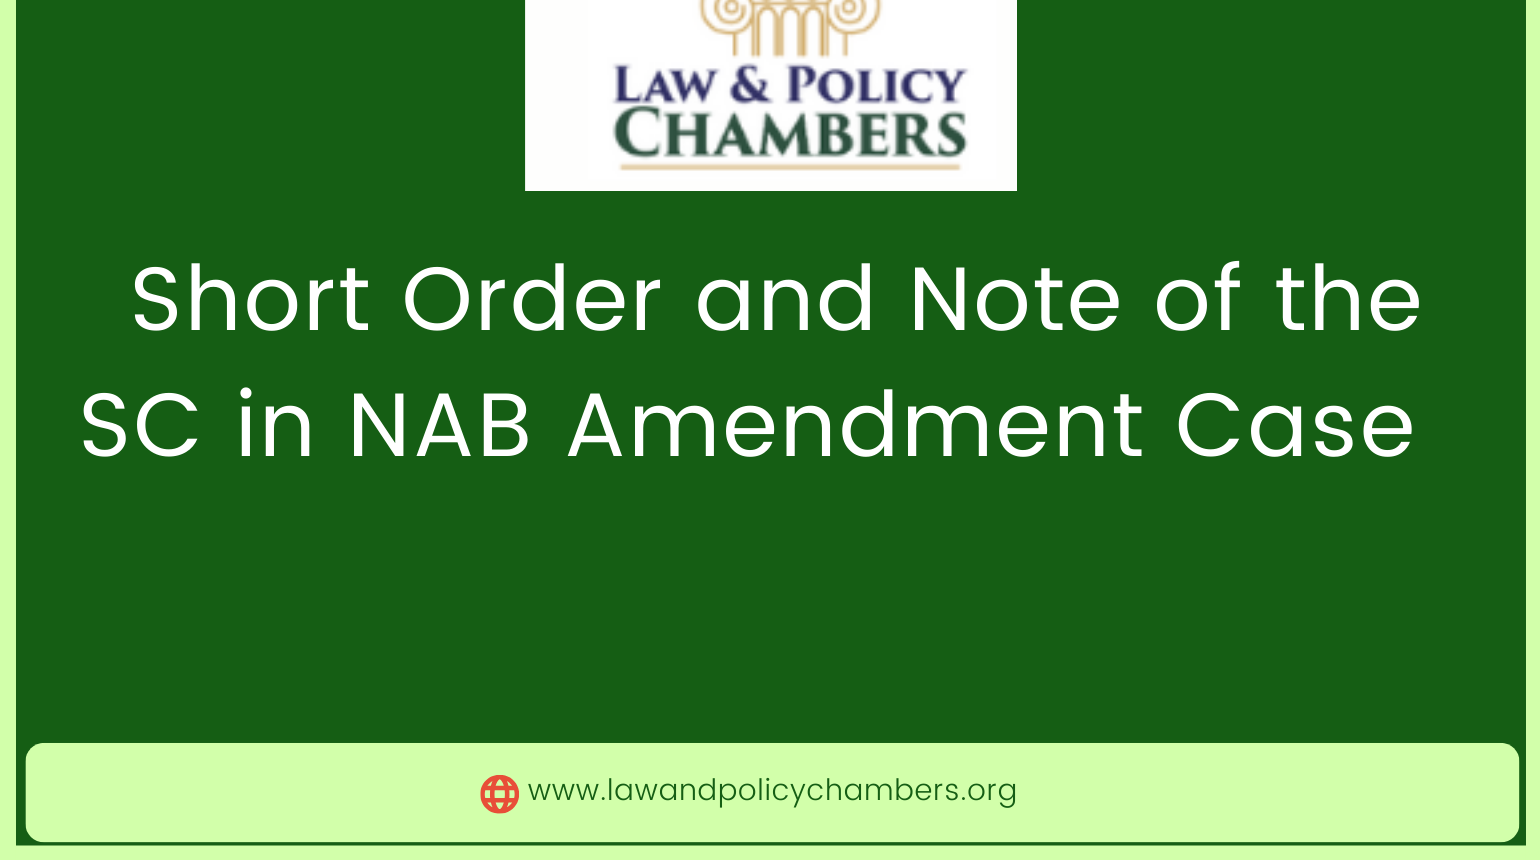 Short Order and Note of the SC in NAB Amendment Case